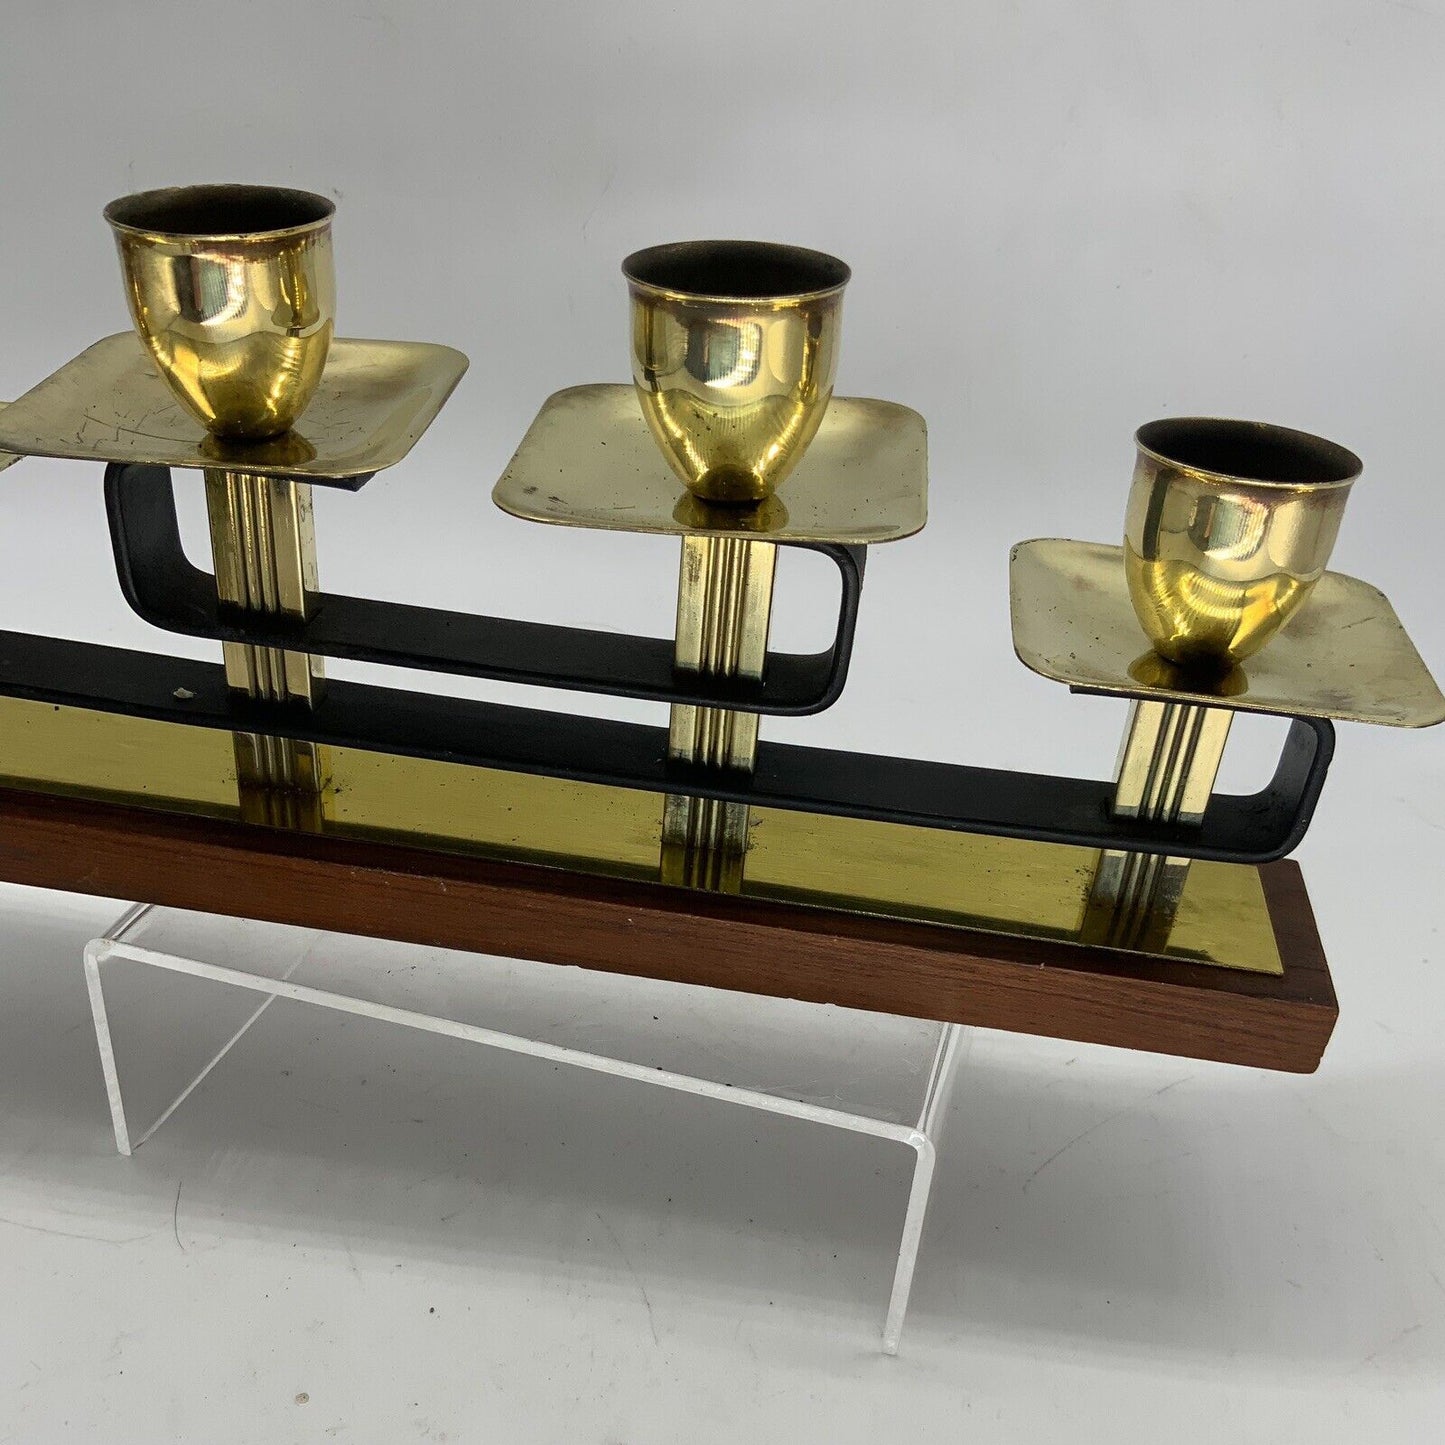 Deco Machine Age German Brass And Teak Candle Holder Candlestick 30s 30x13cm